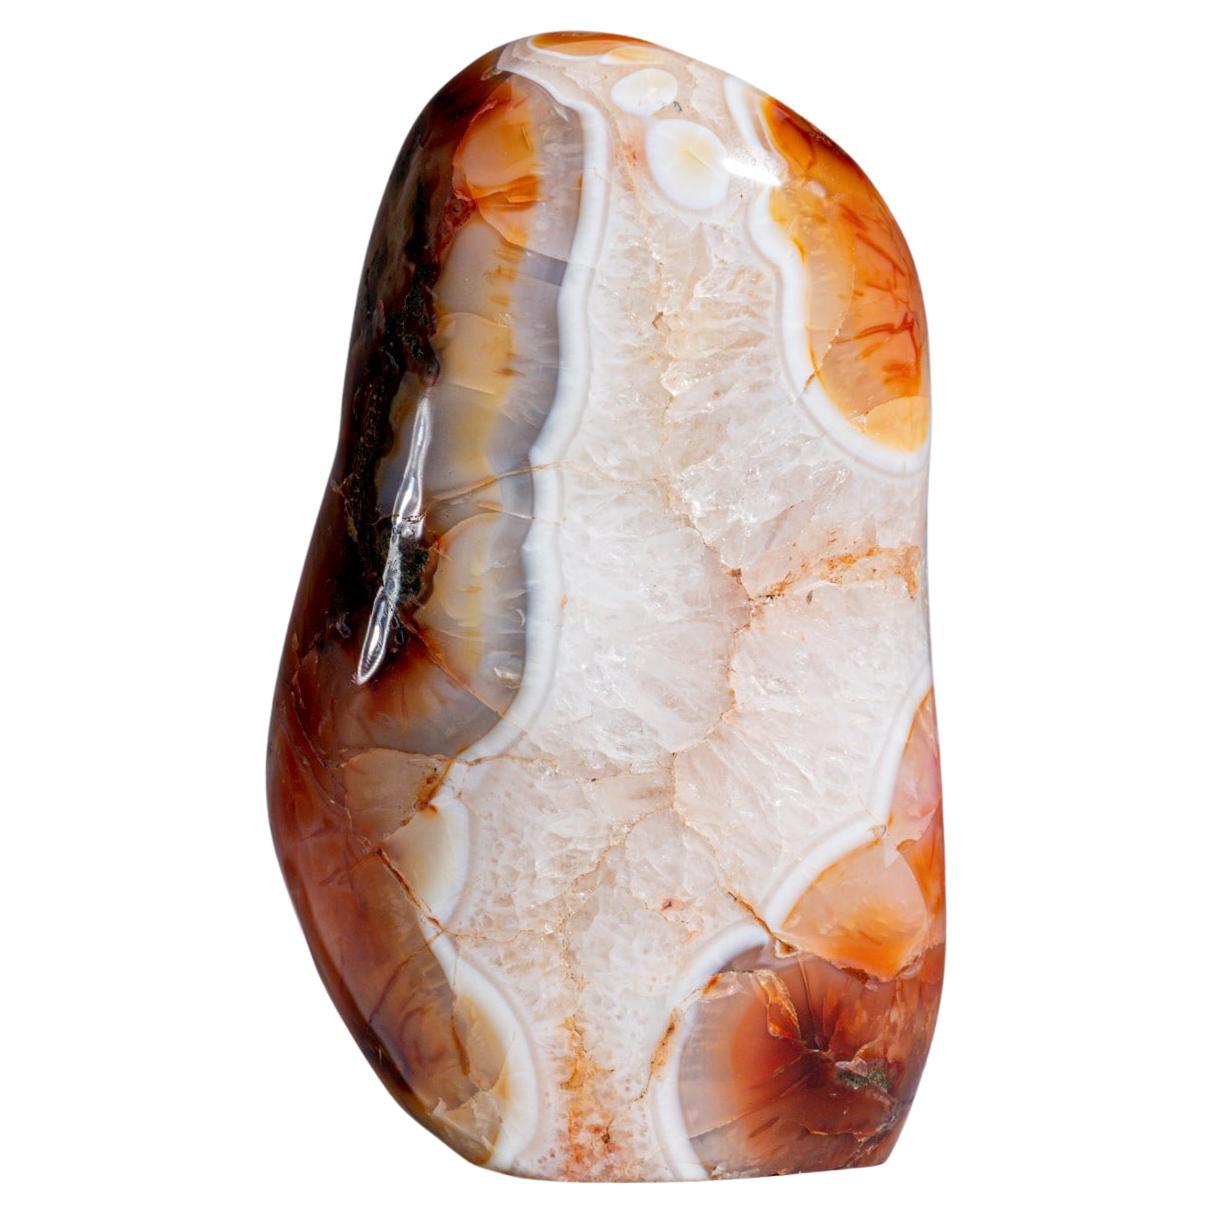 AAA quality Carnelian agate freeform from Madagascar. This beautiful piece has rich golden-yellow to red-orange color and is hand polished to a smooth, highly reflective surface. This freeform is a perfect addition to any crystal